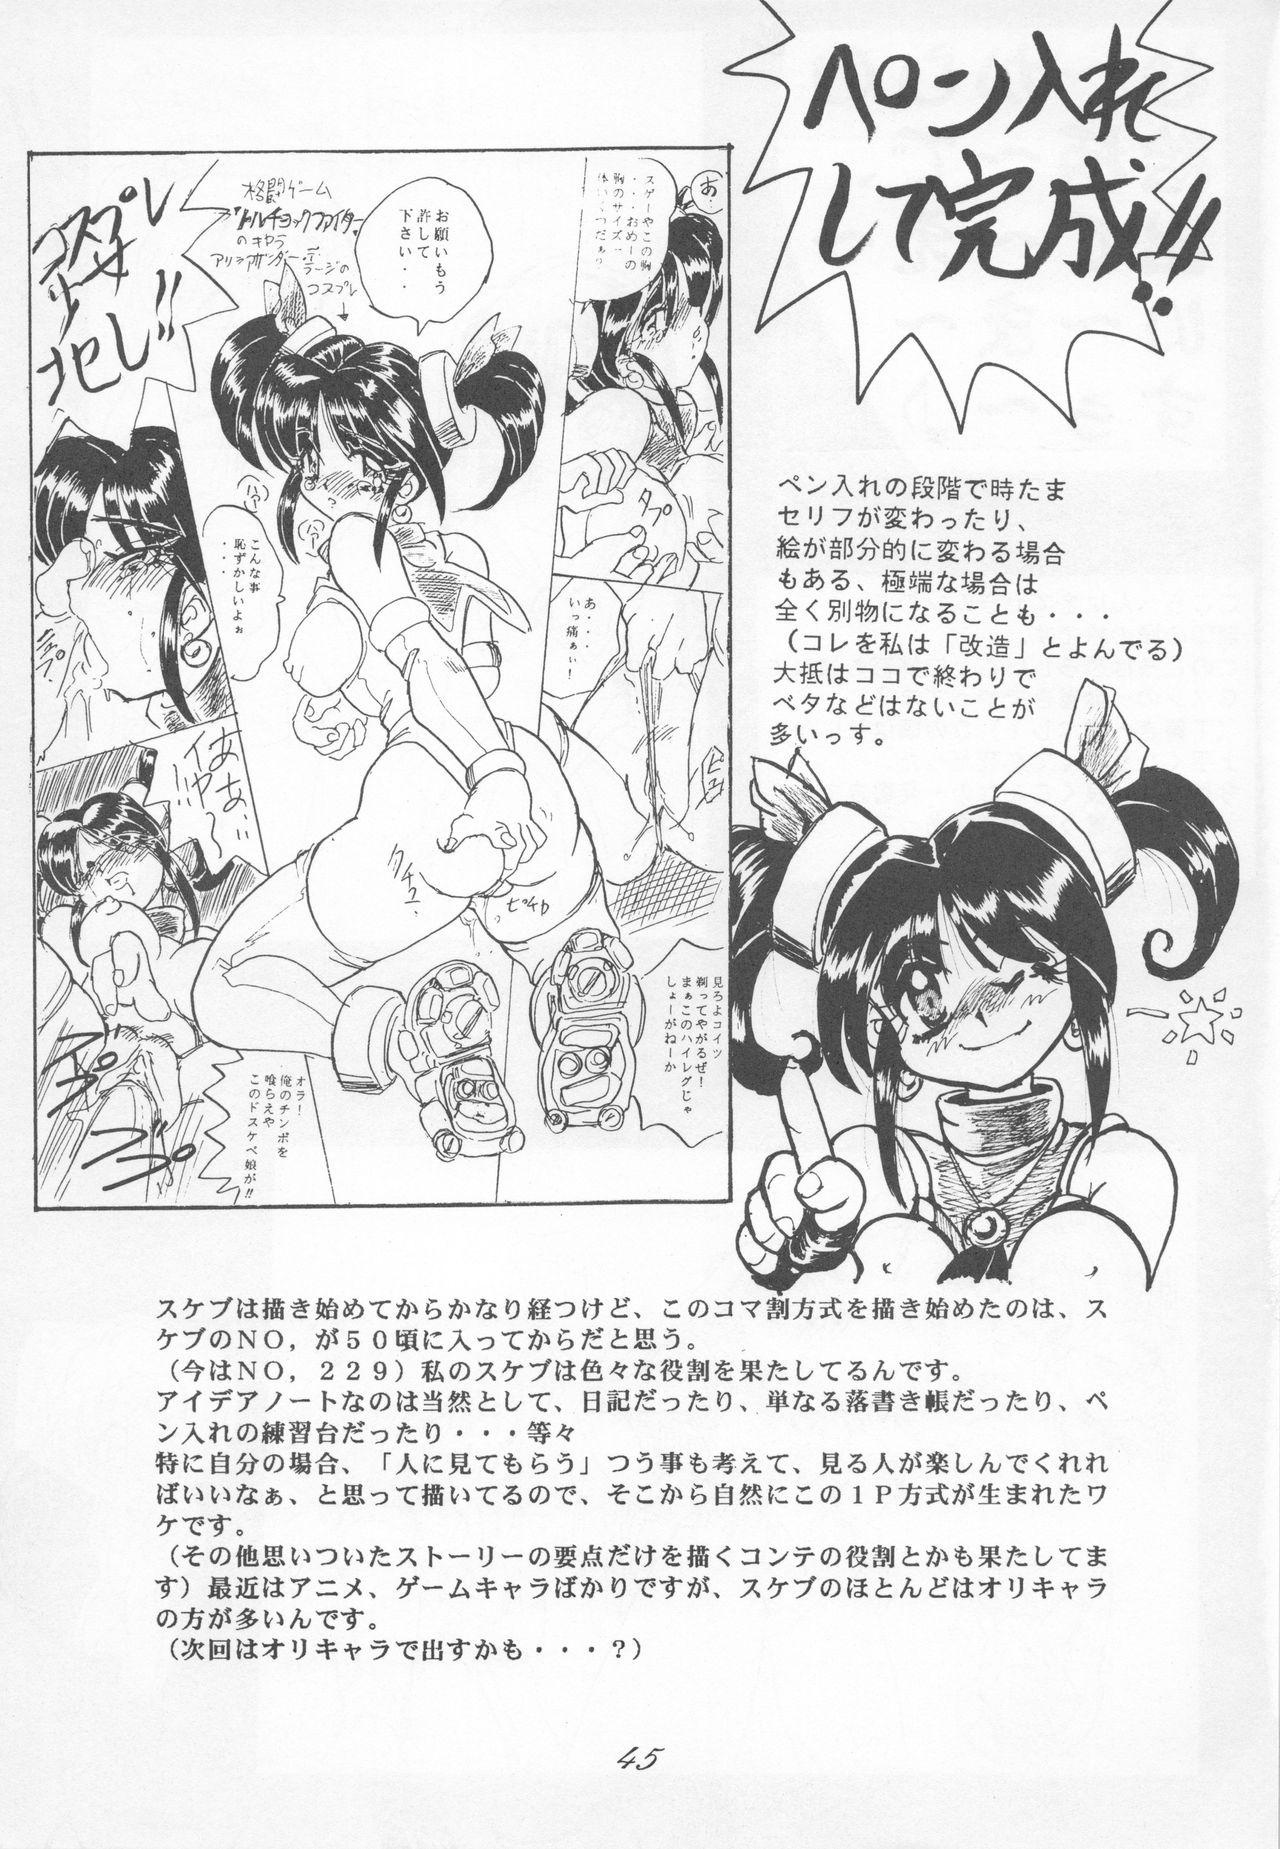 Sailor Moon 1 Page Gekijou P2 - SAILOR MOON ONE PAGE THEATER II 44